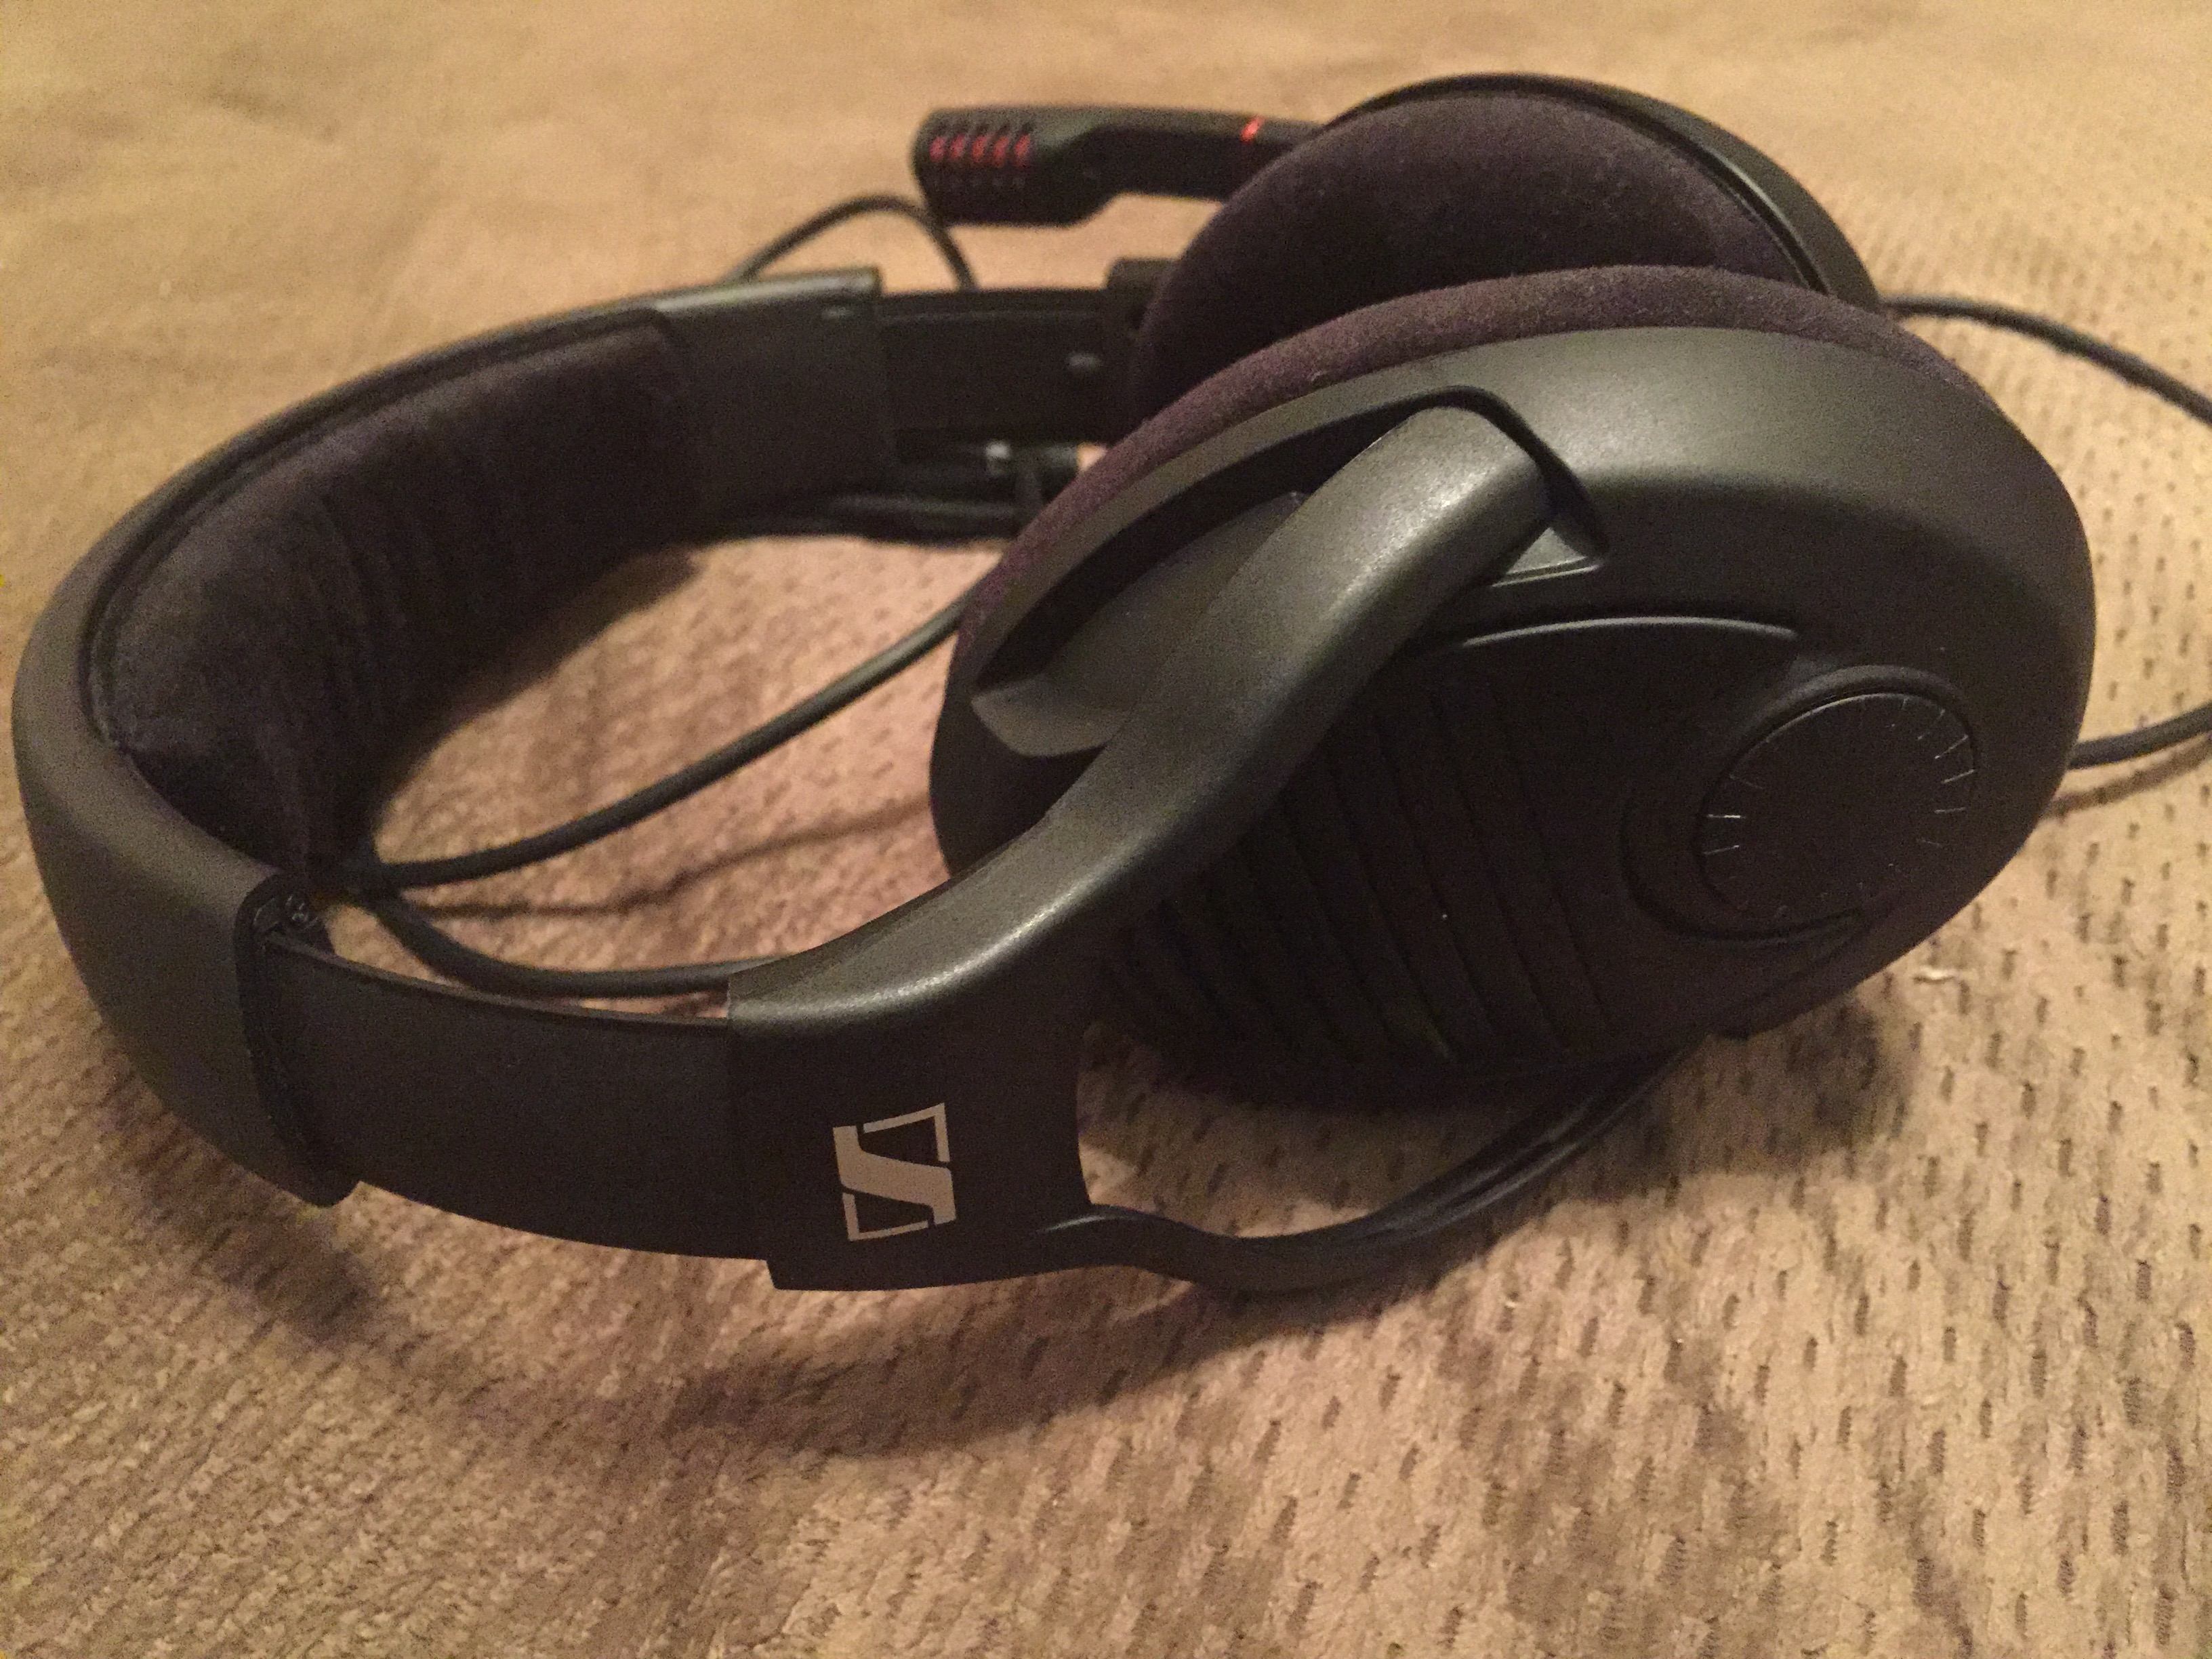 Sennheiser PC 373D Review - Does a Better Gaming Headset Mean It's Any Good"